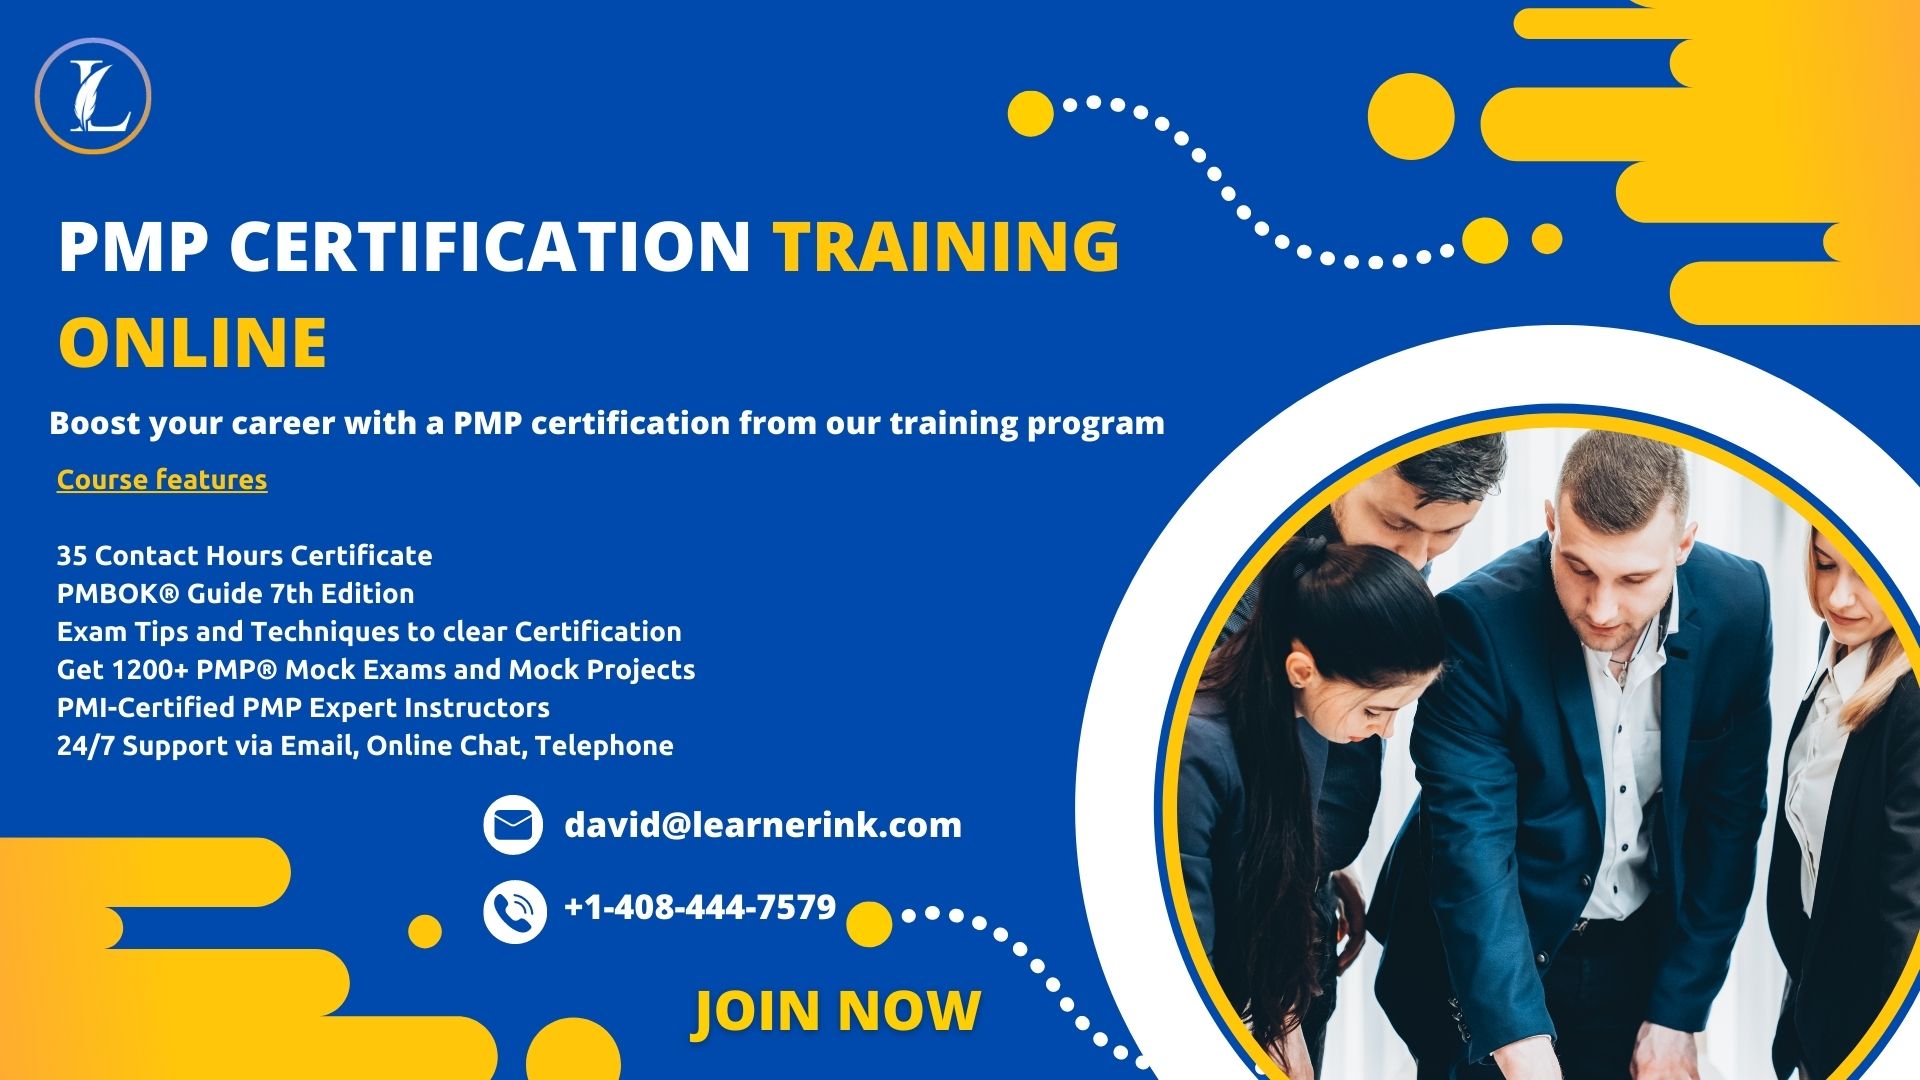 Boost your career with a PMP certification from our training program, Online Event